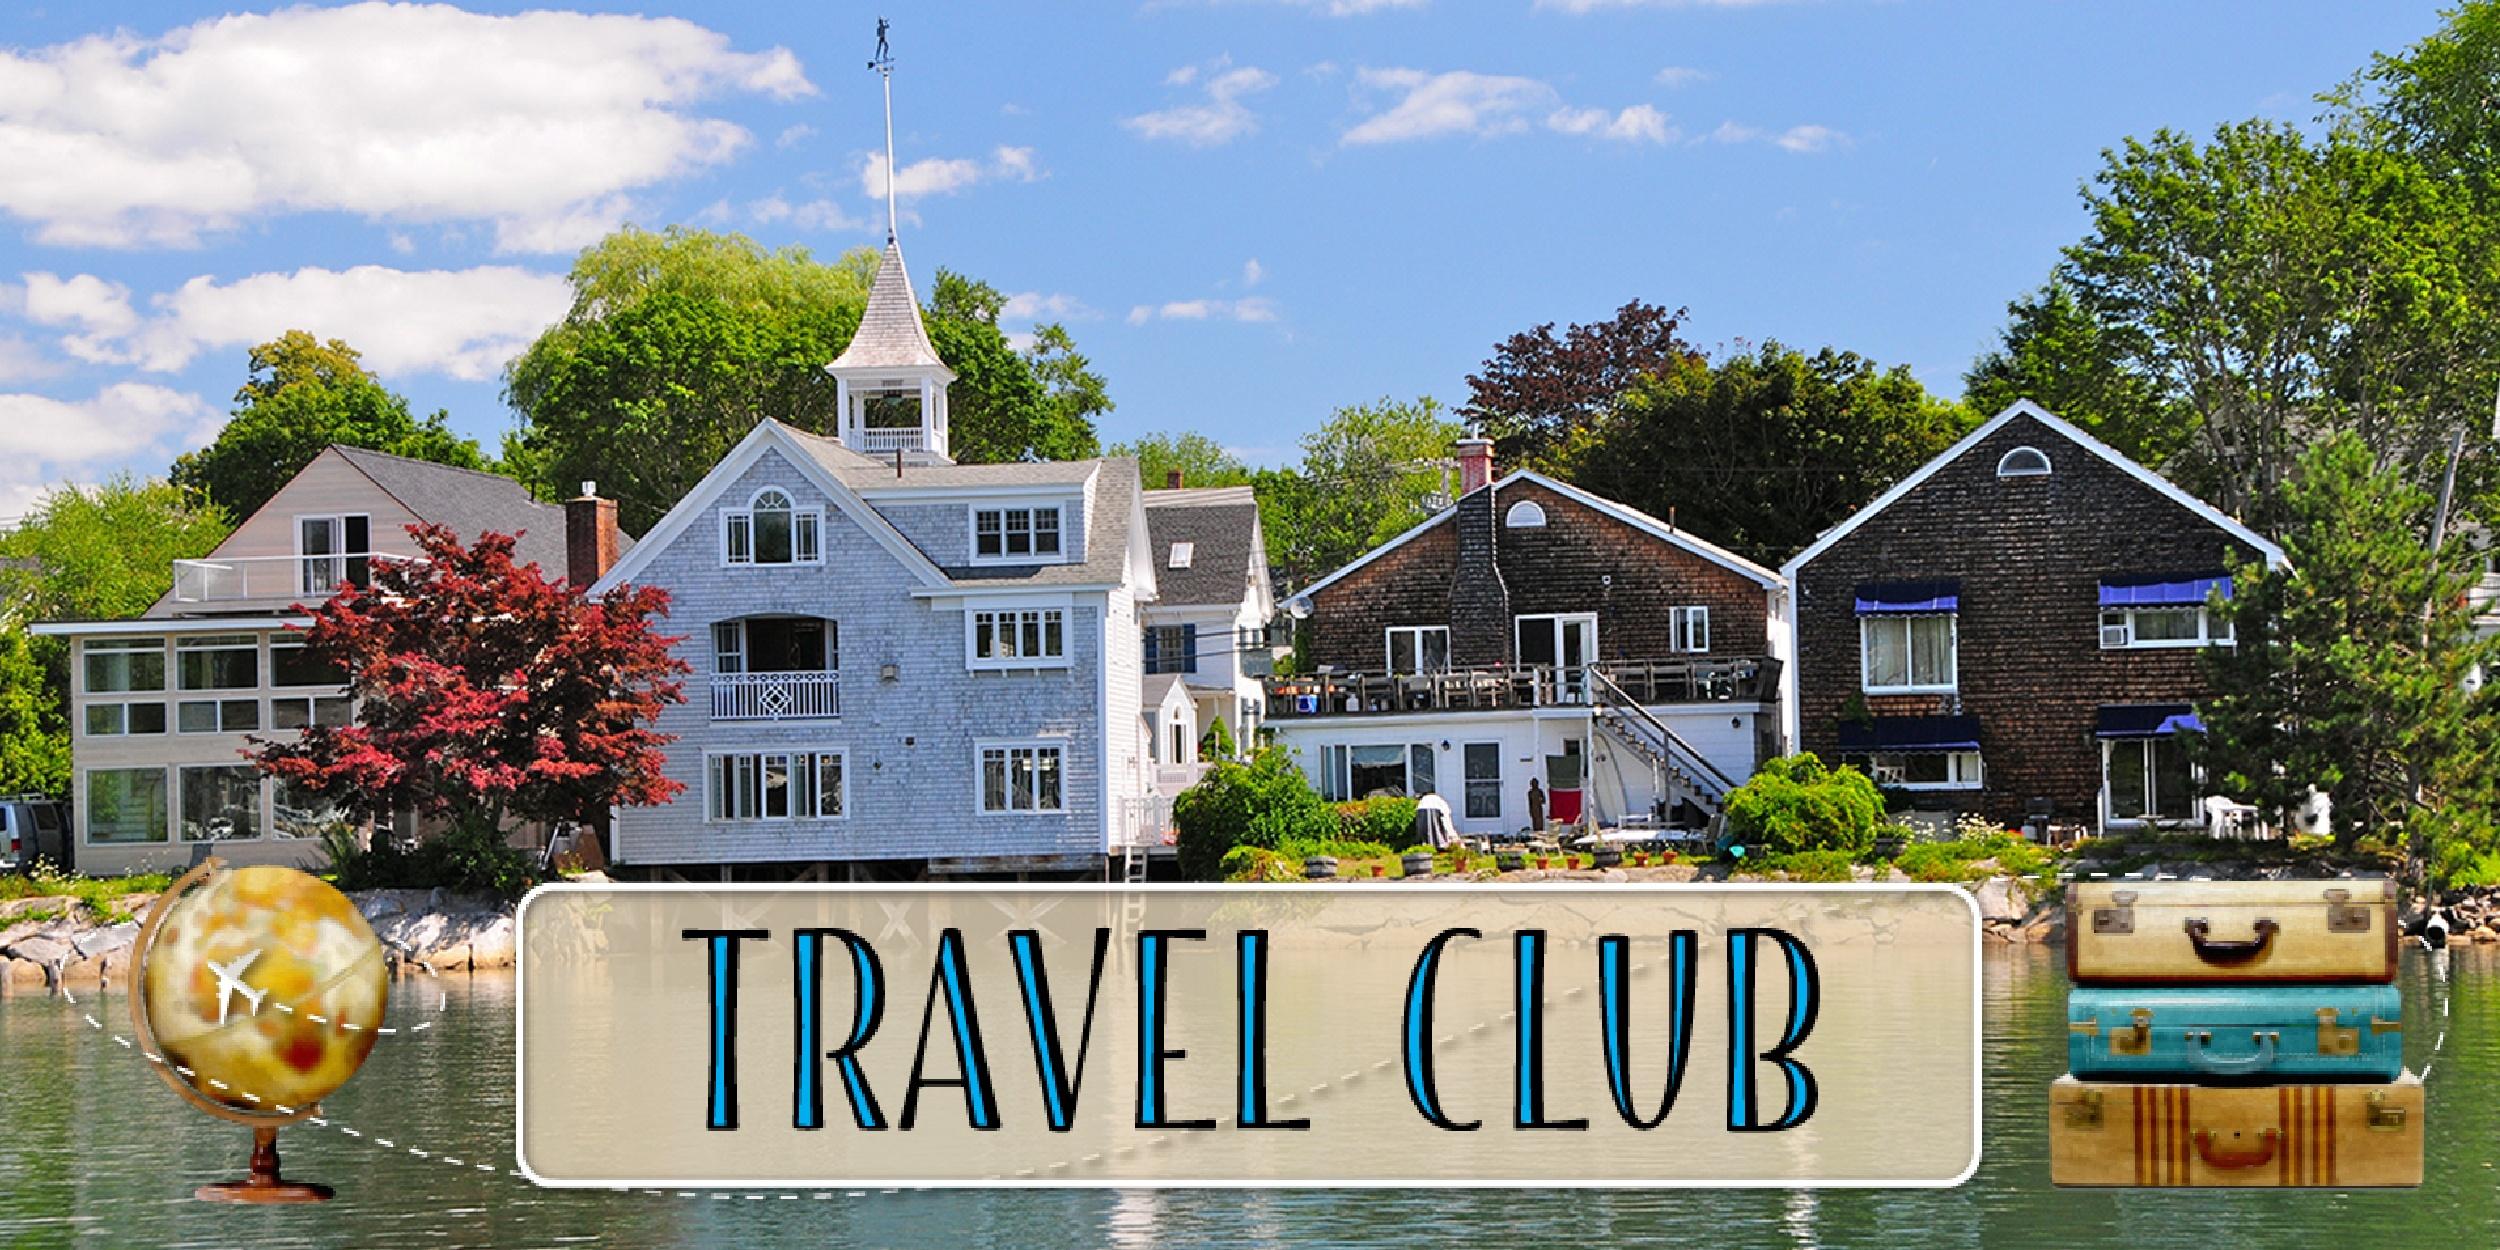 Travel Club - houses overlooking the water